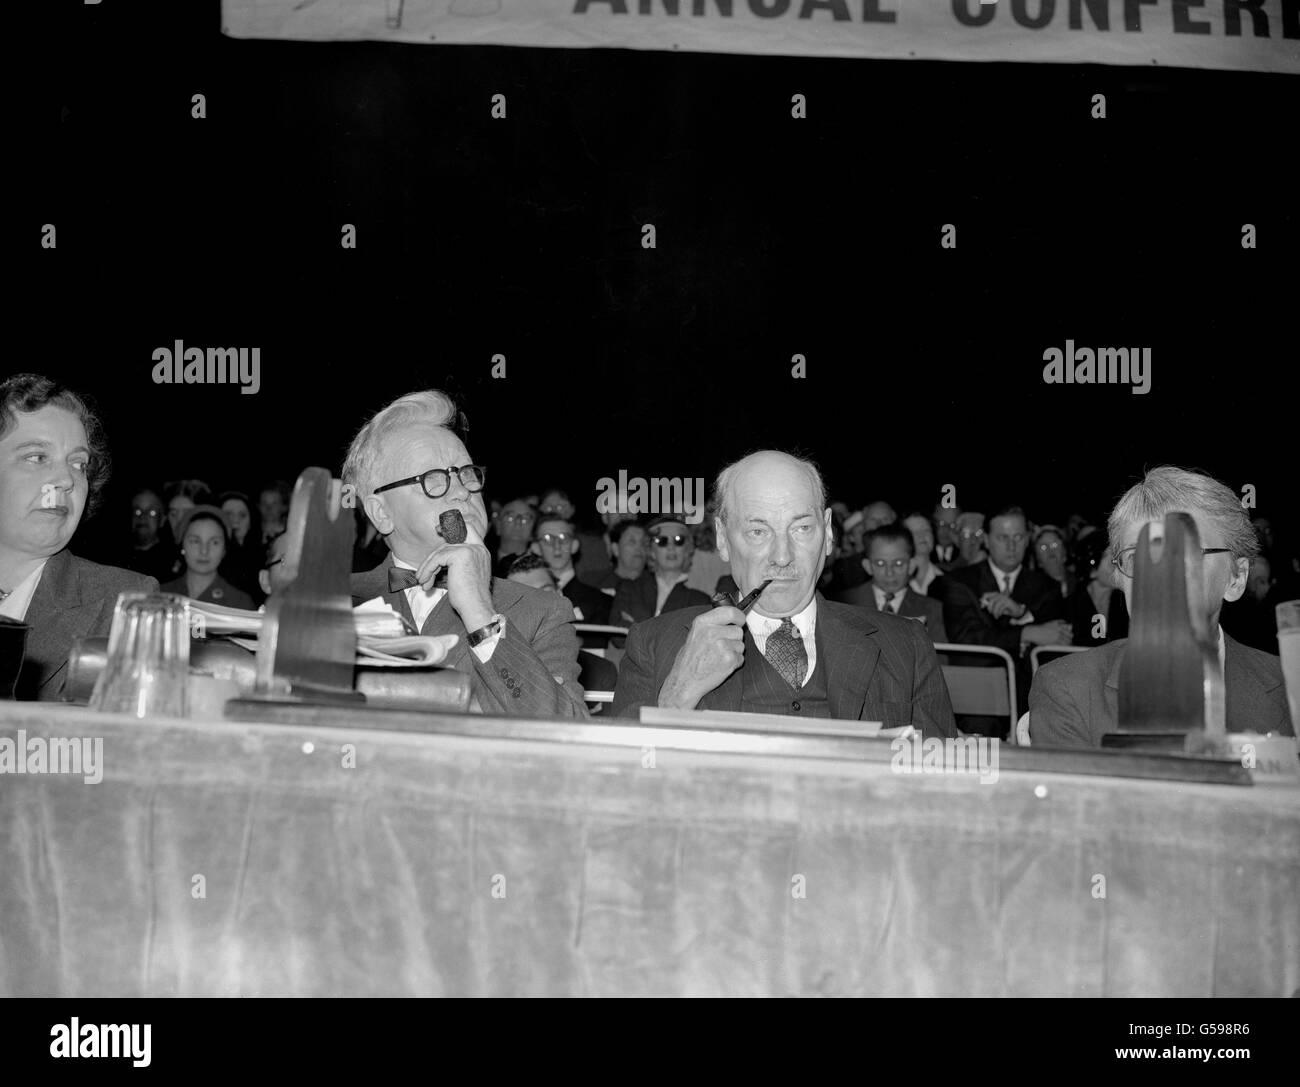 Puffing at their pipes as they listen to speeches, Party Leader Clement Attlee (r) and Herbert Morrison (grandfather of Peter Mandelson) at the 1955 Labour Party Conference, held at Margate. Stock Photo